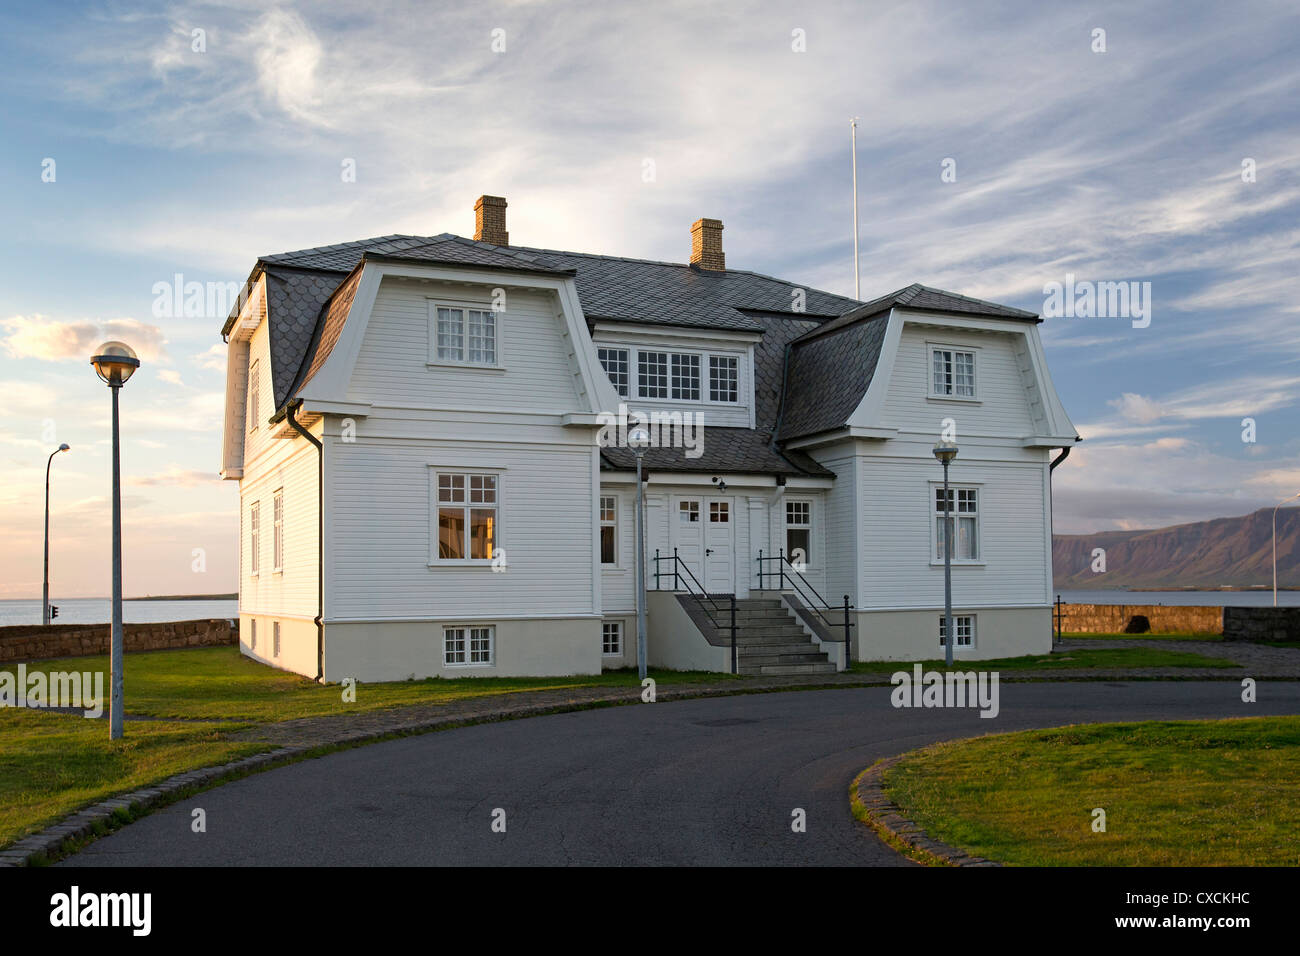 Höfði (Hofdi) House, most famous for the1986 Summit meeting between Ronald Reagan and Mikhail Gorbachev to end the Cold War. Stock Photo